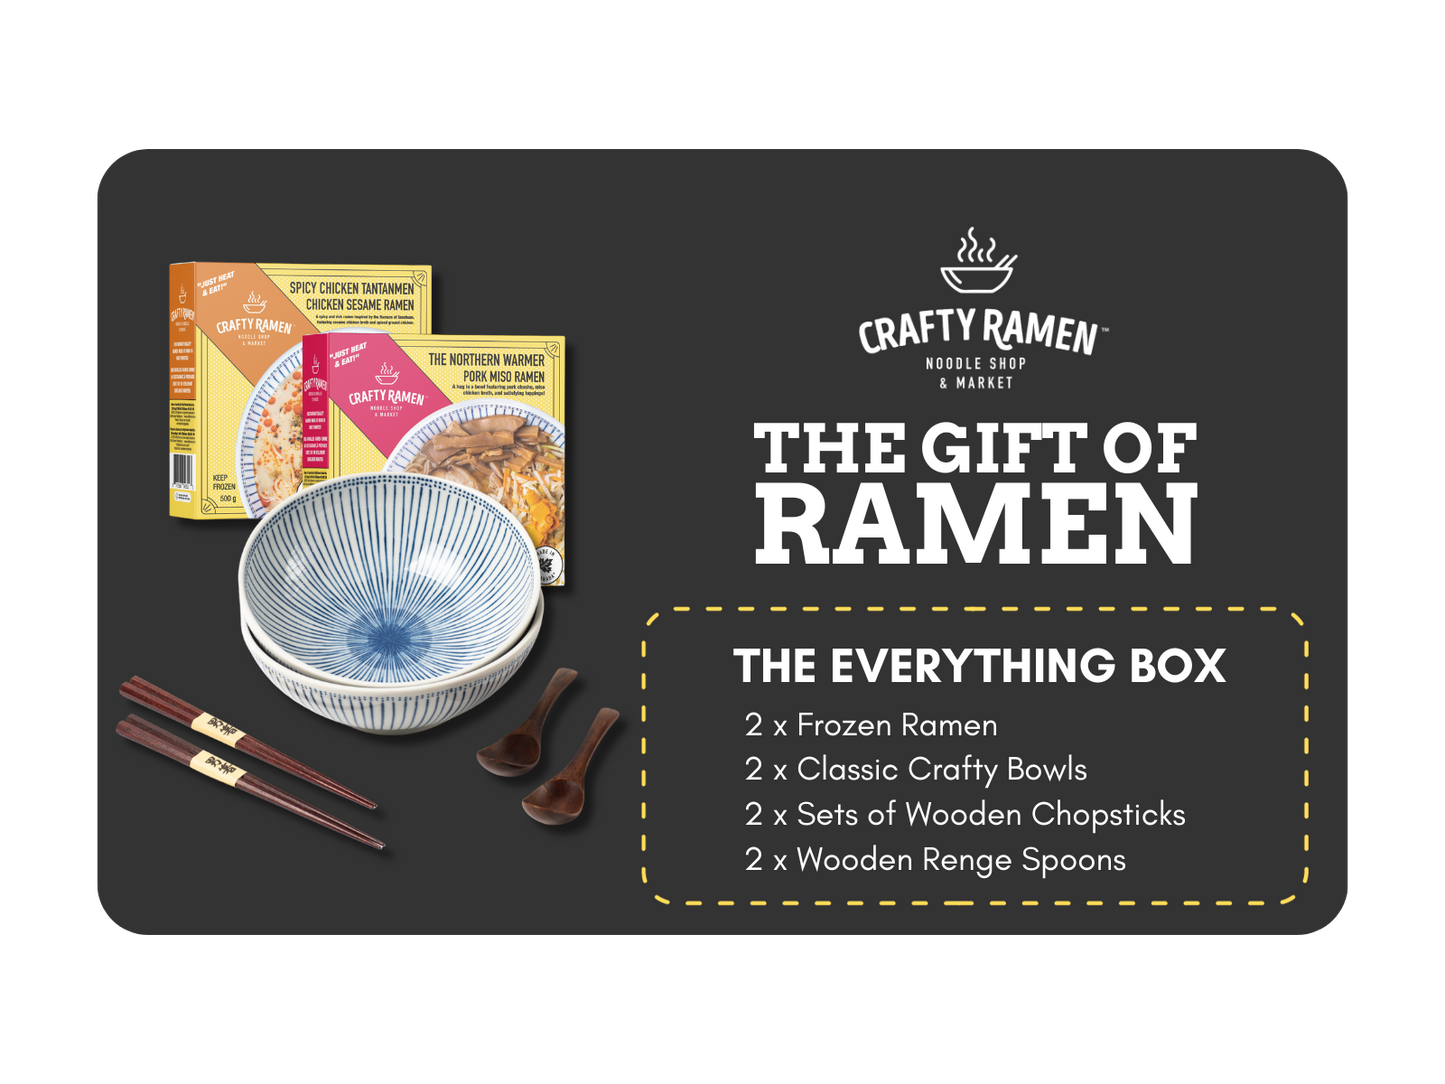 Give The Gift Of Ramen